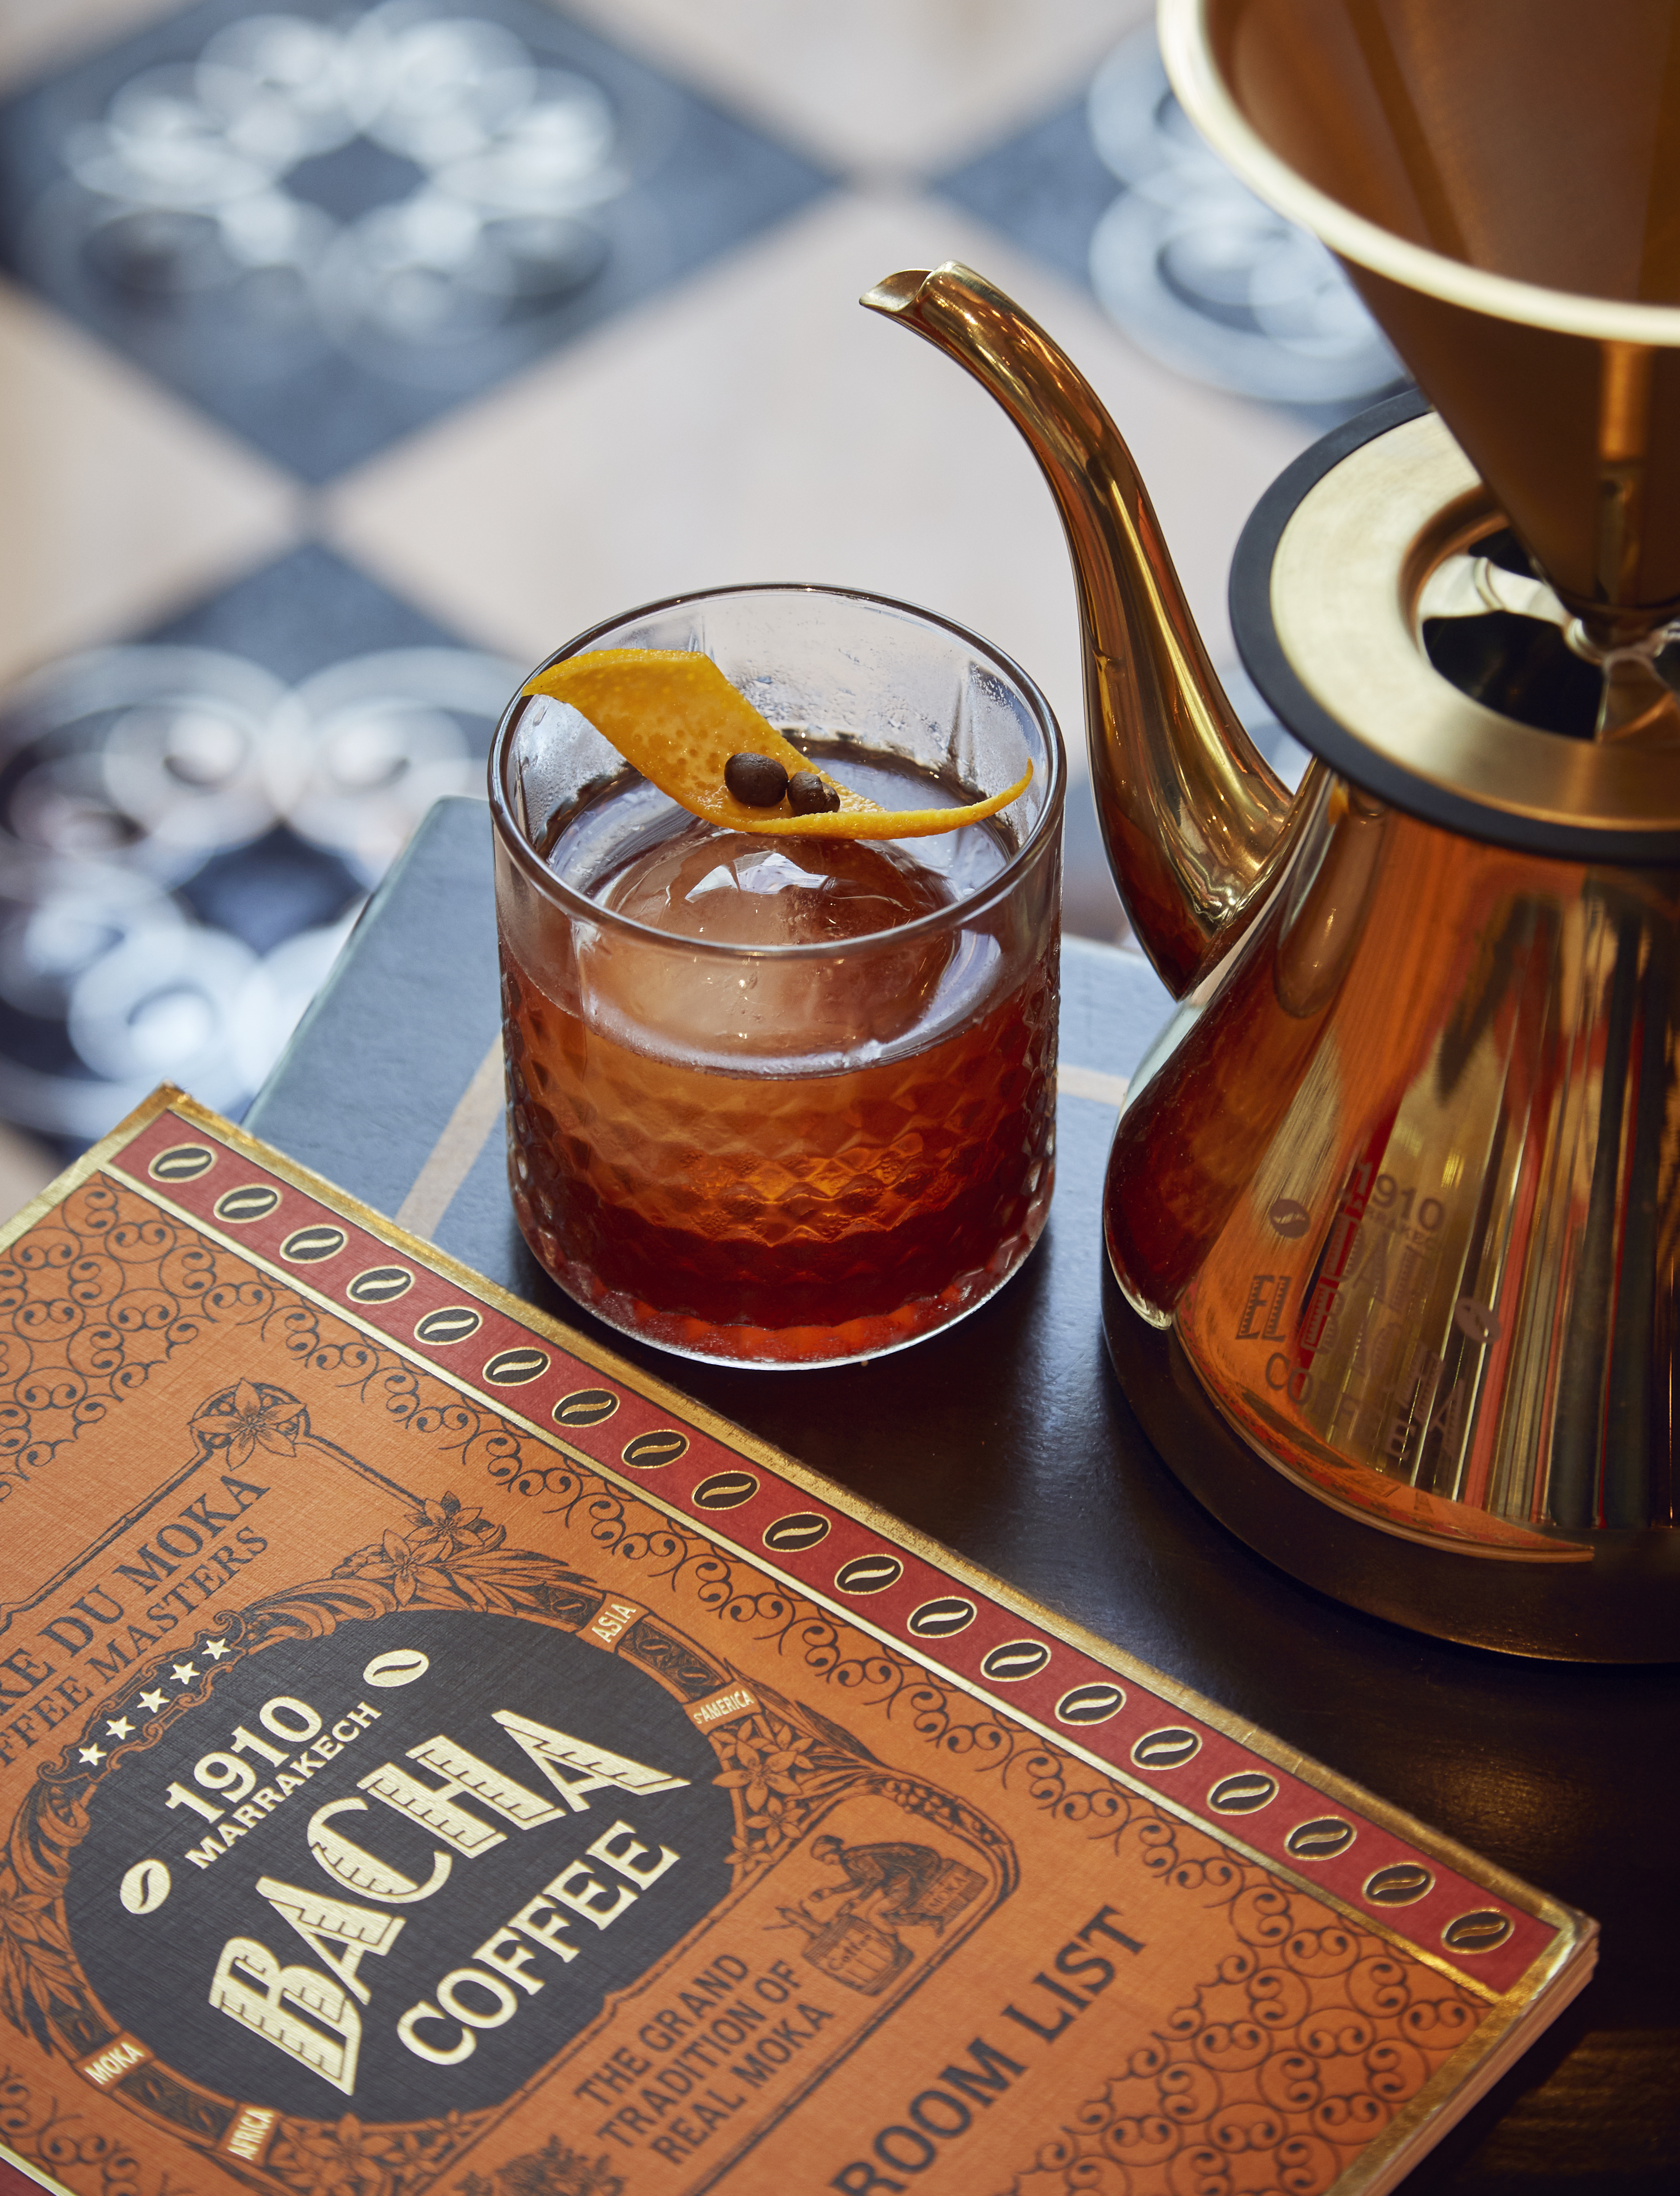 Bacha-coffee-cocktail-coffee-story-Negroni-second